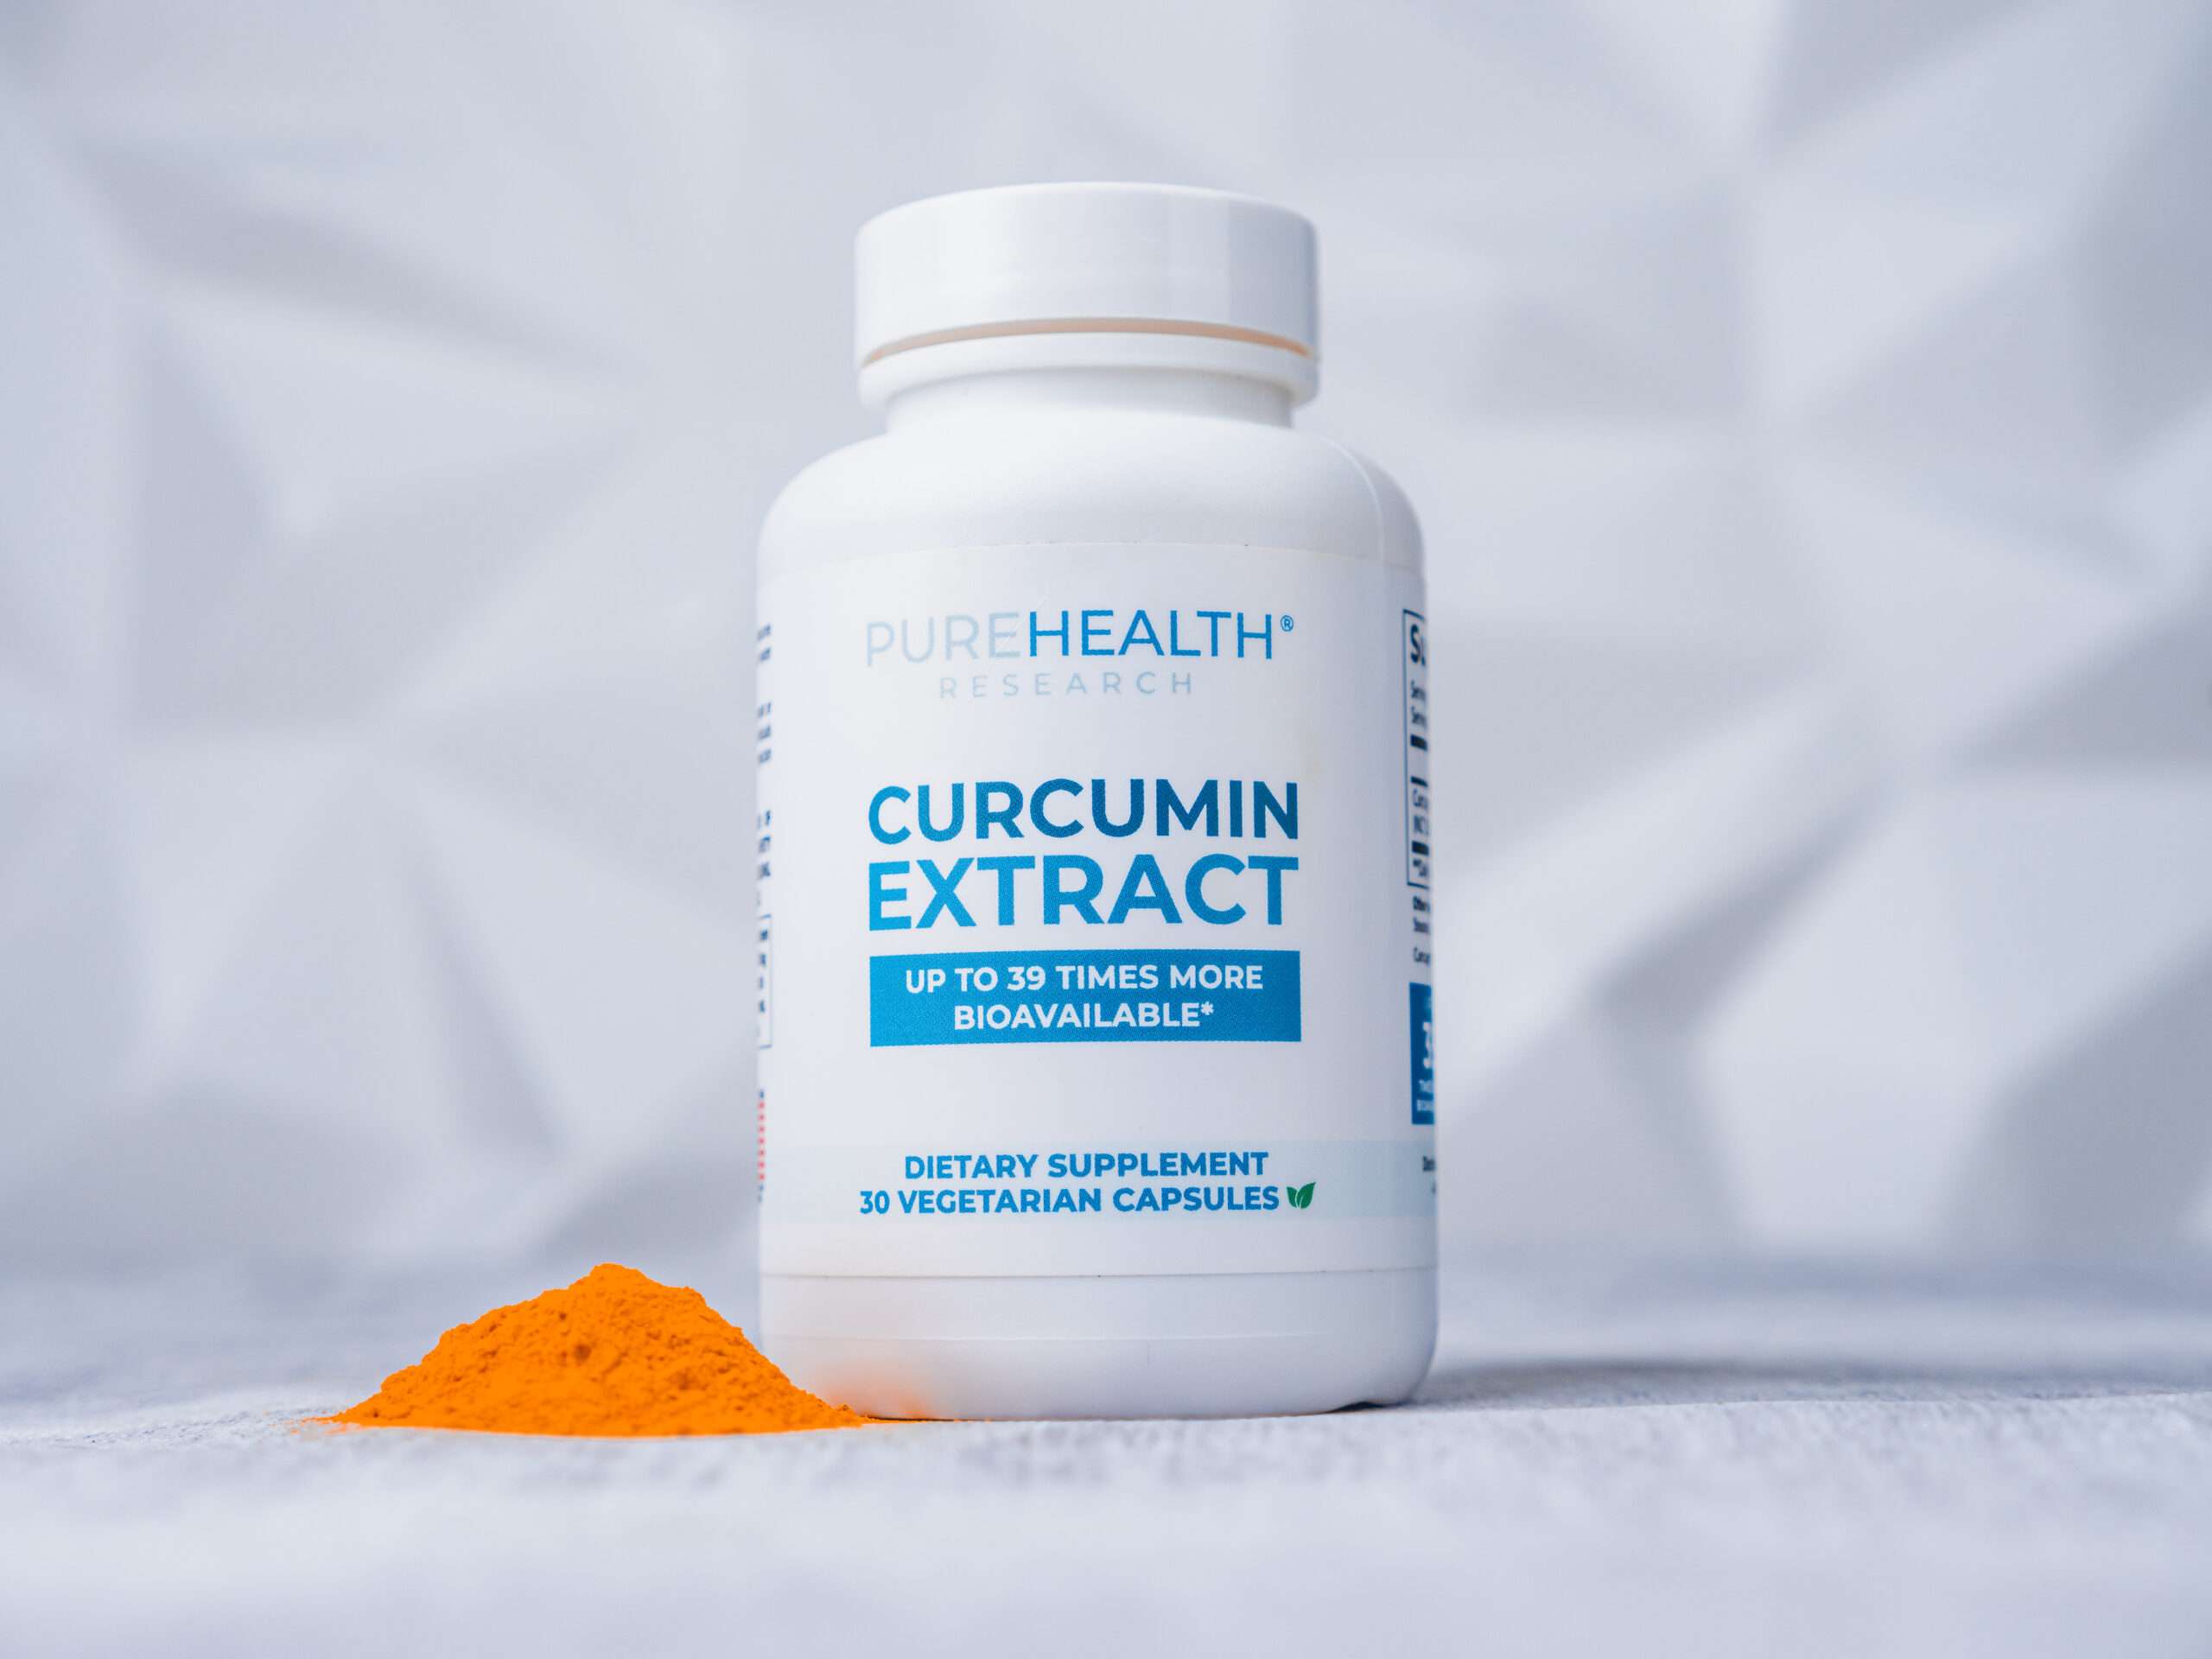 Curcumin extract supplement by PureHealth Research